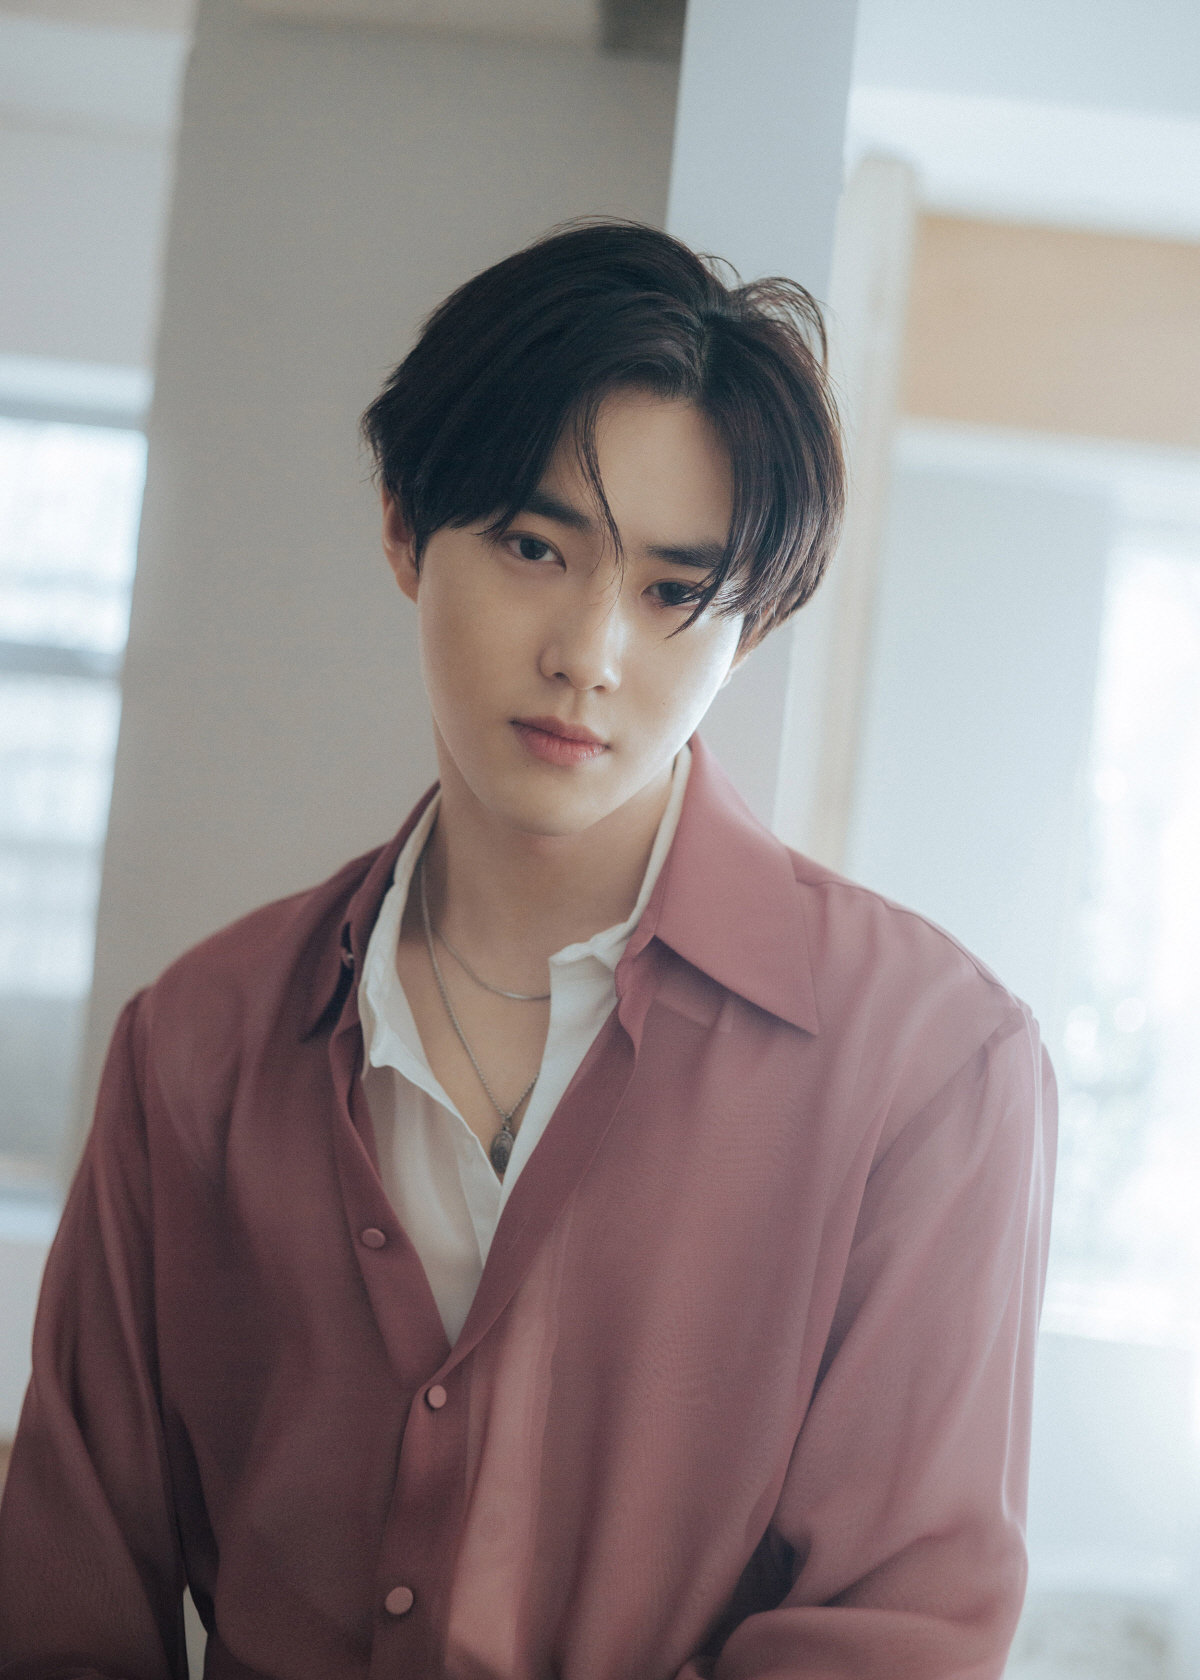 EXO Suho continues her charming Solo song Remady with the first mini album song Starry Night.Suhos first mini album, Self-Portrait, released on the 30th, contains a total of six lyrical songs based on band sound, including the title song Love, Lets Love, and Suho participated in the concept planning as well as the entire song lyrics.The album Starry Night is a rock ballad genre song that expresses the story after Suhos first solo song Curtain, which was released through SM STATION (Station) in 2017, so that Suho can meet more mature musical sensibility.In addition, the lyrics include a breakup with a lover, a scene that is disconnected from the world as if it had lowered a dark curtain, and a cold piano, an electric guitar with a day, and a dynamic string performance maximize the sad atmosphere of the song.Meanwhile, Suhos first mini album, Self-Portrait, will be released on March 30 at 6 p.m. on various music sites.